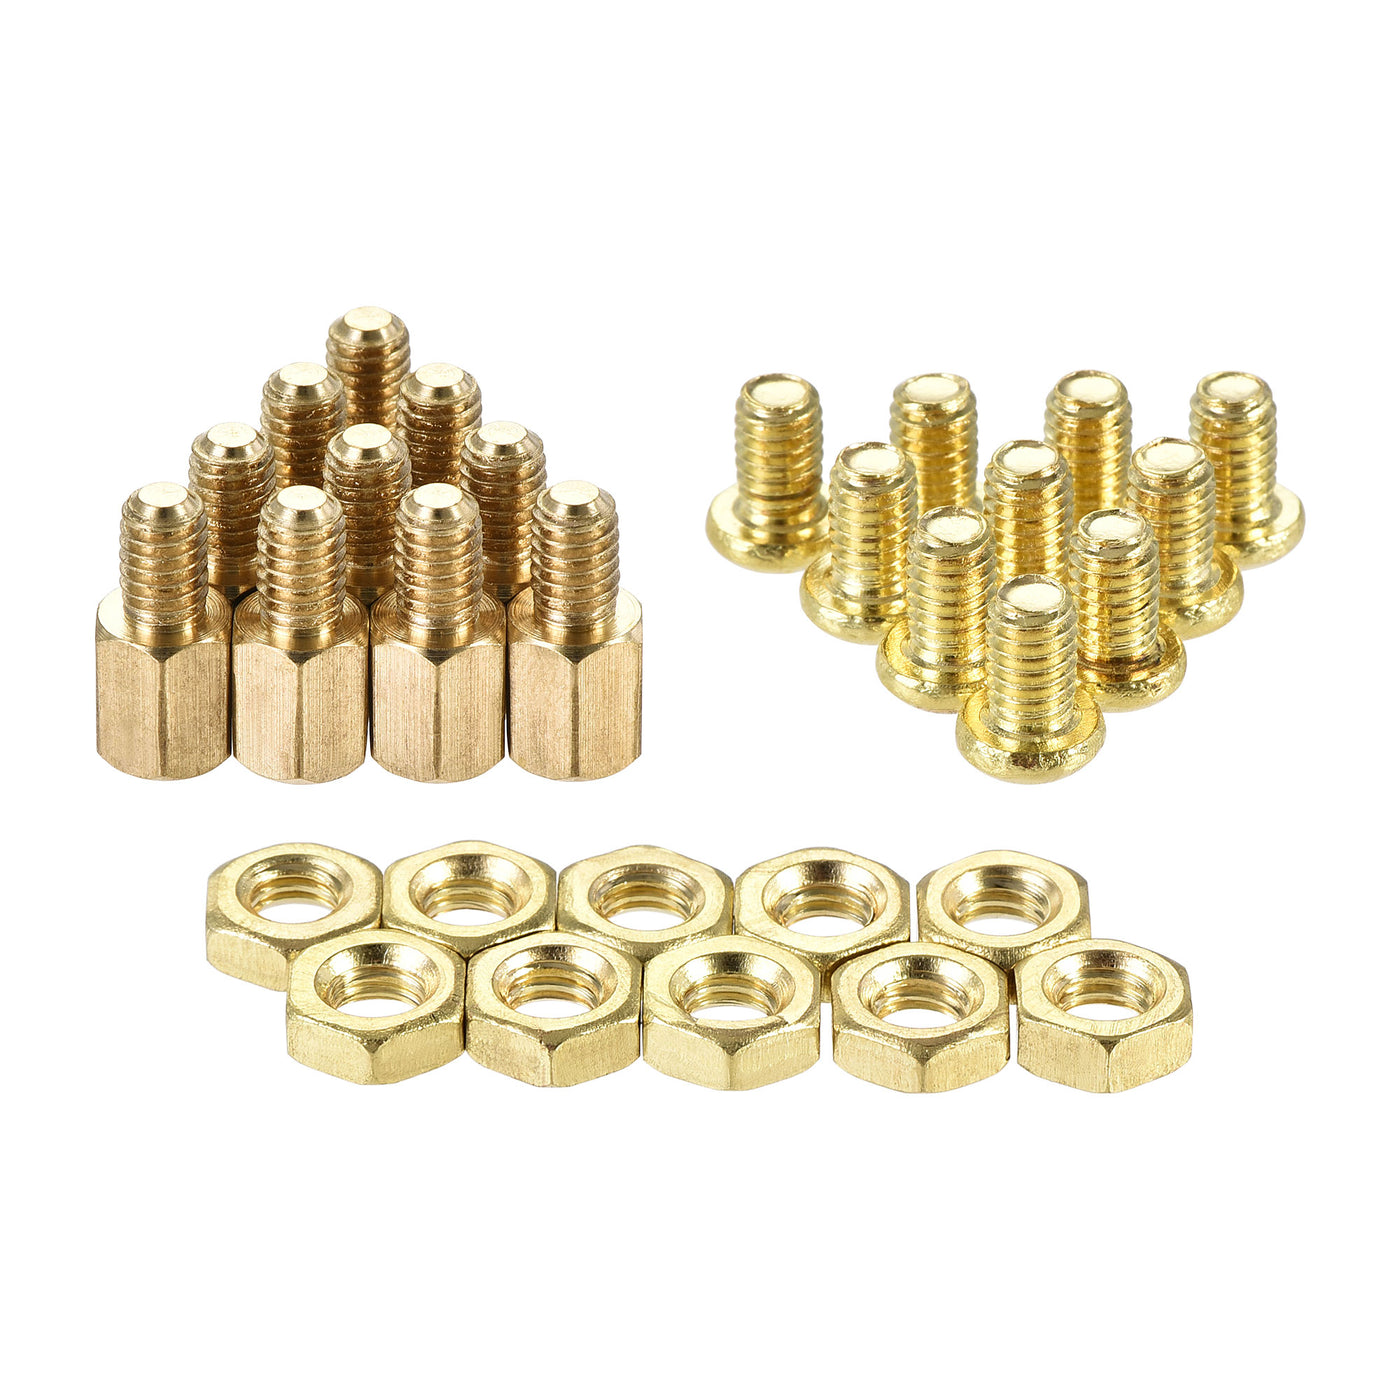 uxcell 50 Pieces M3 9+4mm Hex Standoff Spacer Male to Female Thread Brass  Spacer Standoff Hexagonal Spacers Standoffs Screws Nuts for PC PCB